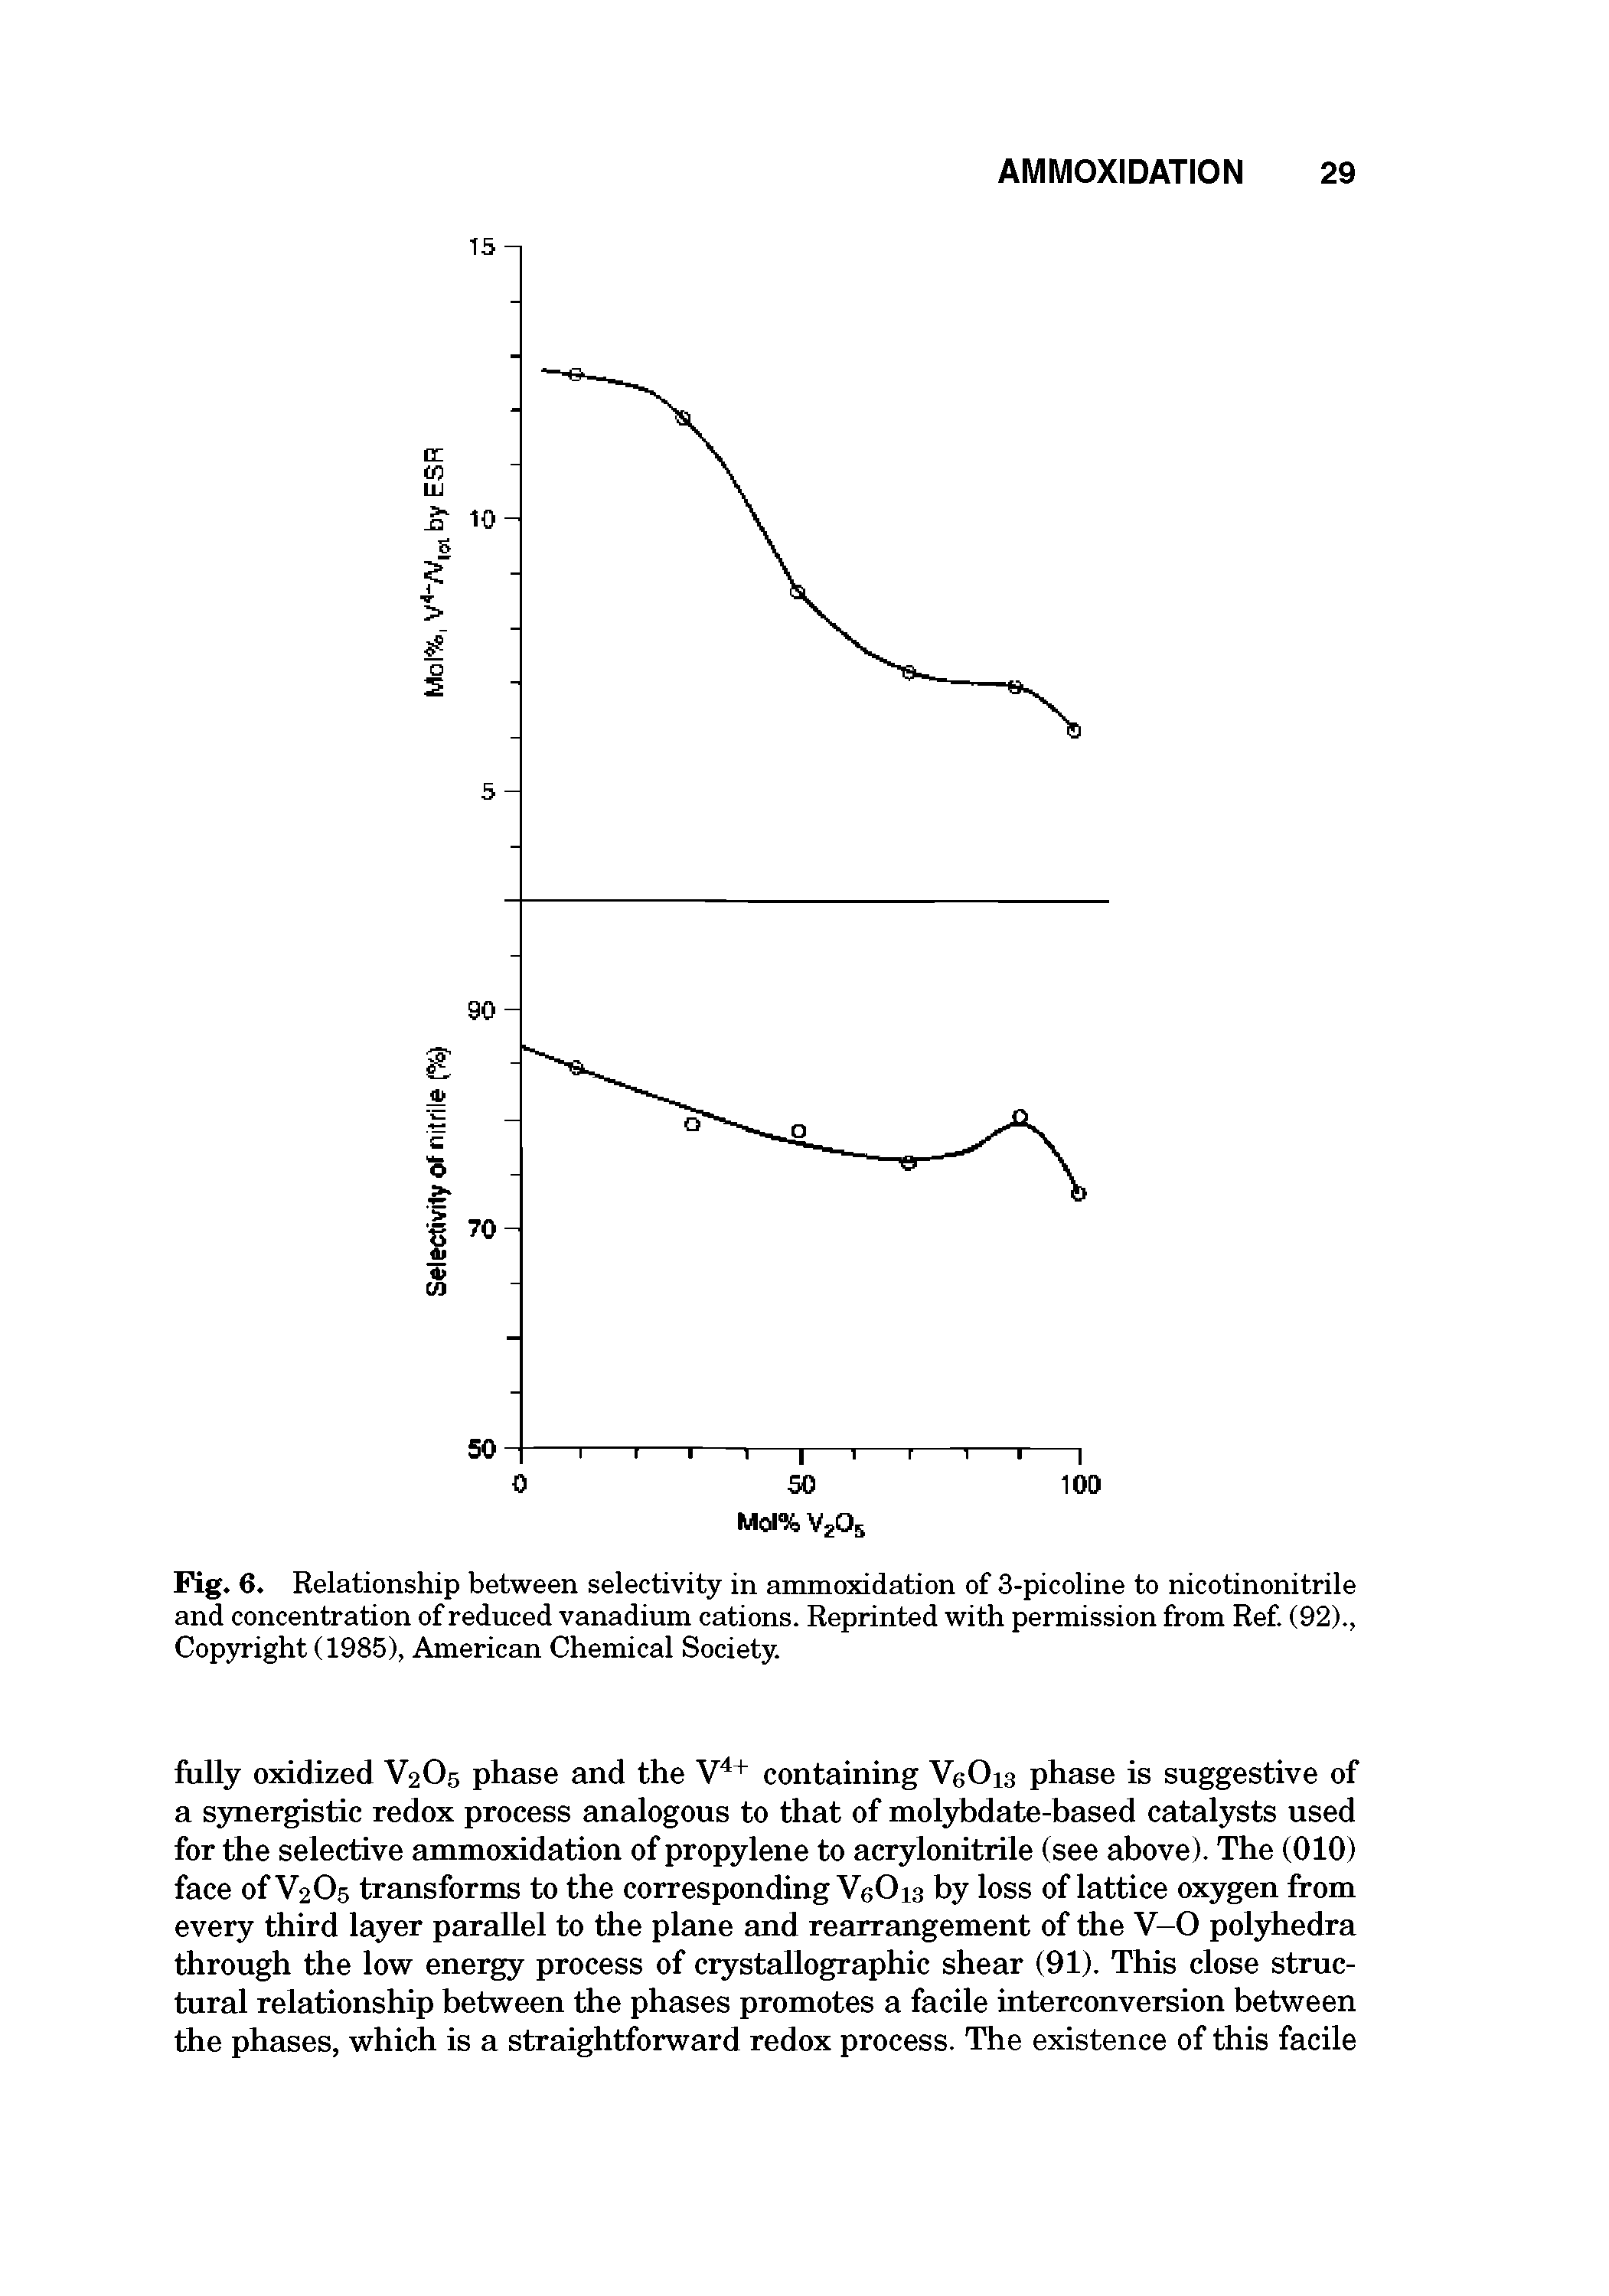 Fig. 6. Relationship between selectivity in ammoxidation of 3-picoline to nicotinonitrile and concentration of reduced vanadium cations. Reprinted with permission from Ref (92)., Copyright (1985), American Chemical Society.